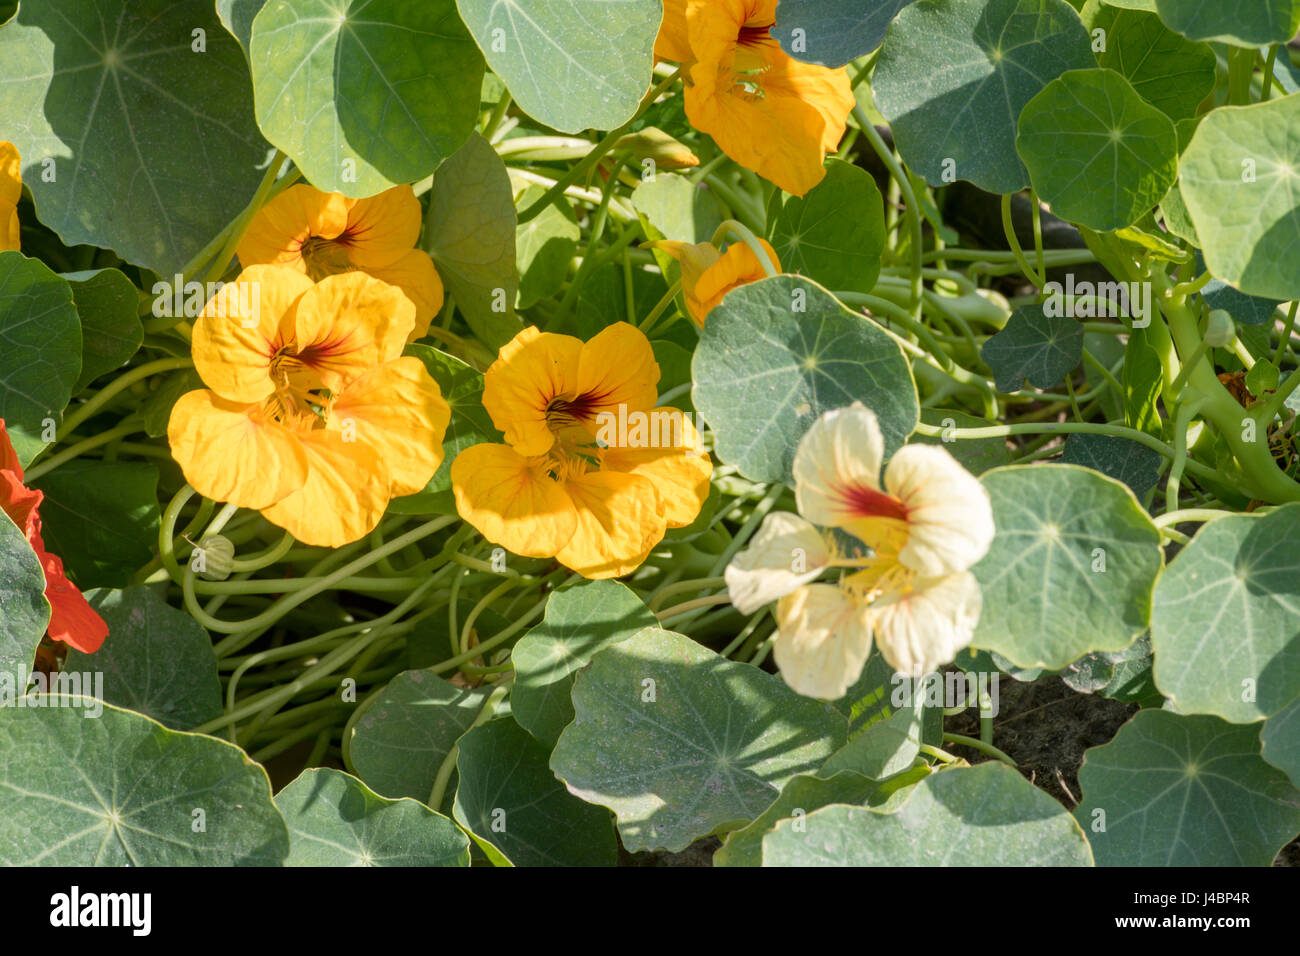 Flowers growing on a farm in Punjab, India. Stock Photo